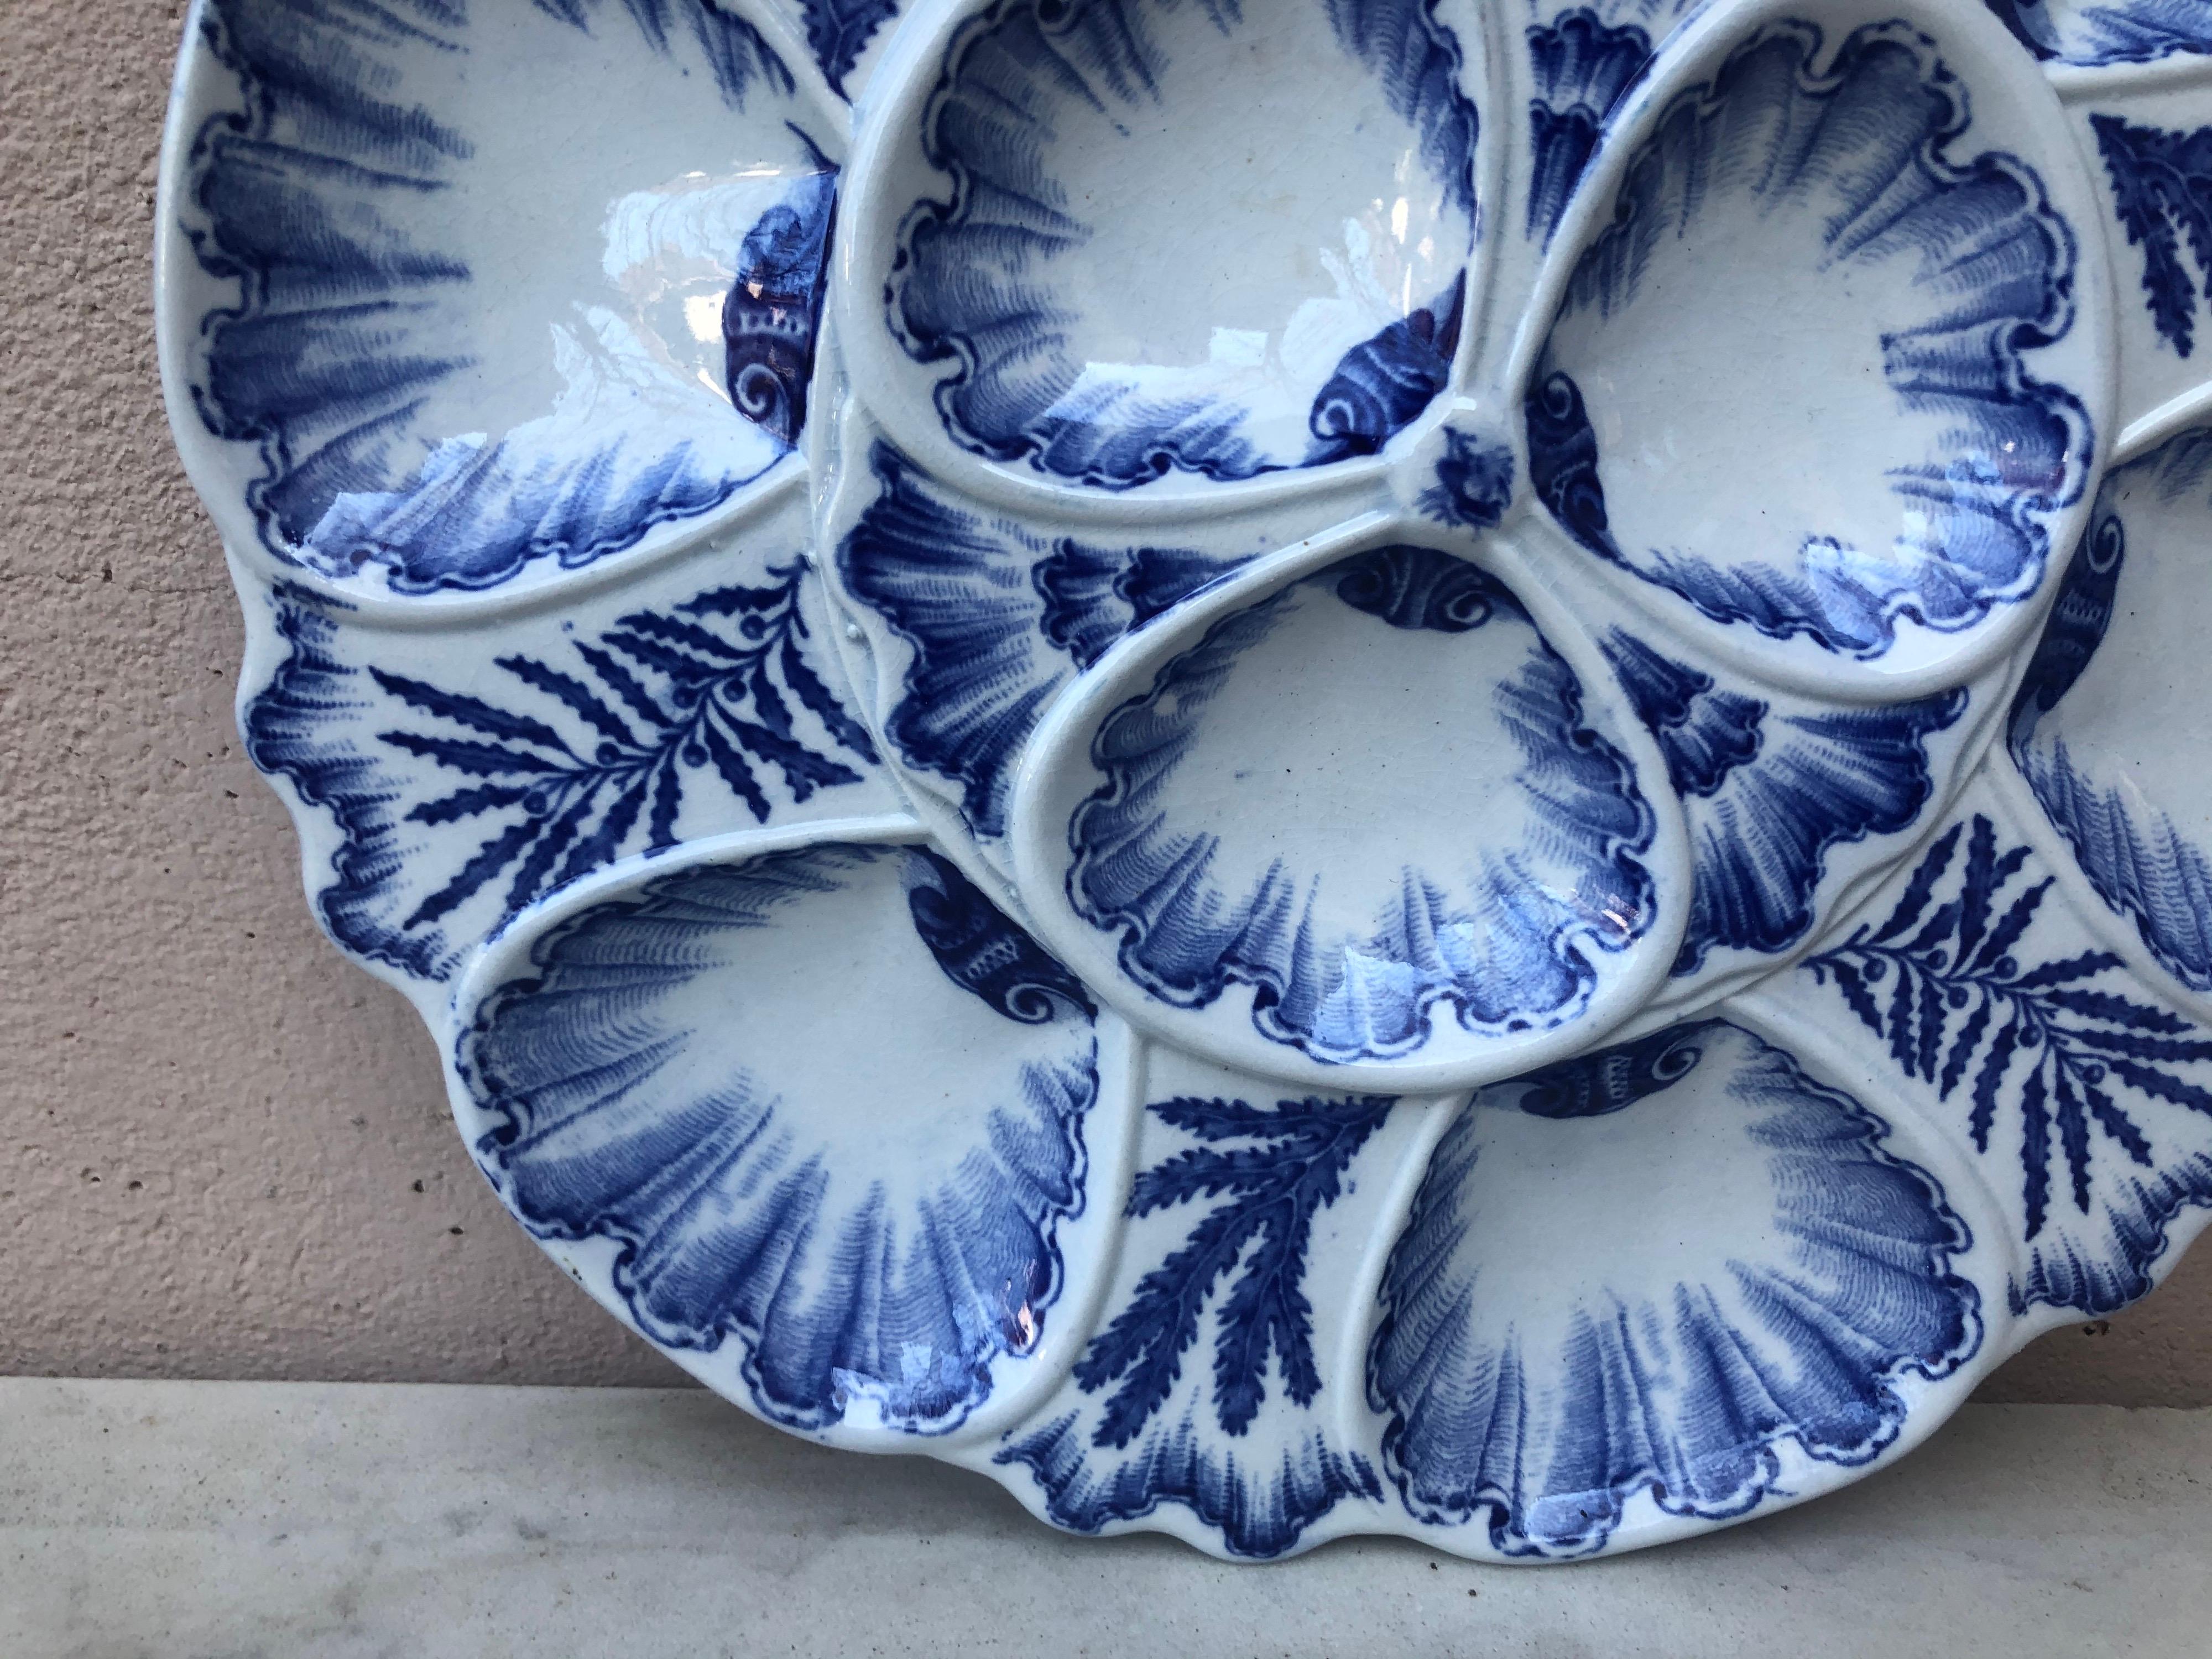 19th century faience blue and white oyster plate signed J. Vieillard & Cie Bordeaux decorated with seaweeds.
Large size.
Mark / 1829-1895.